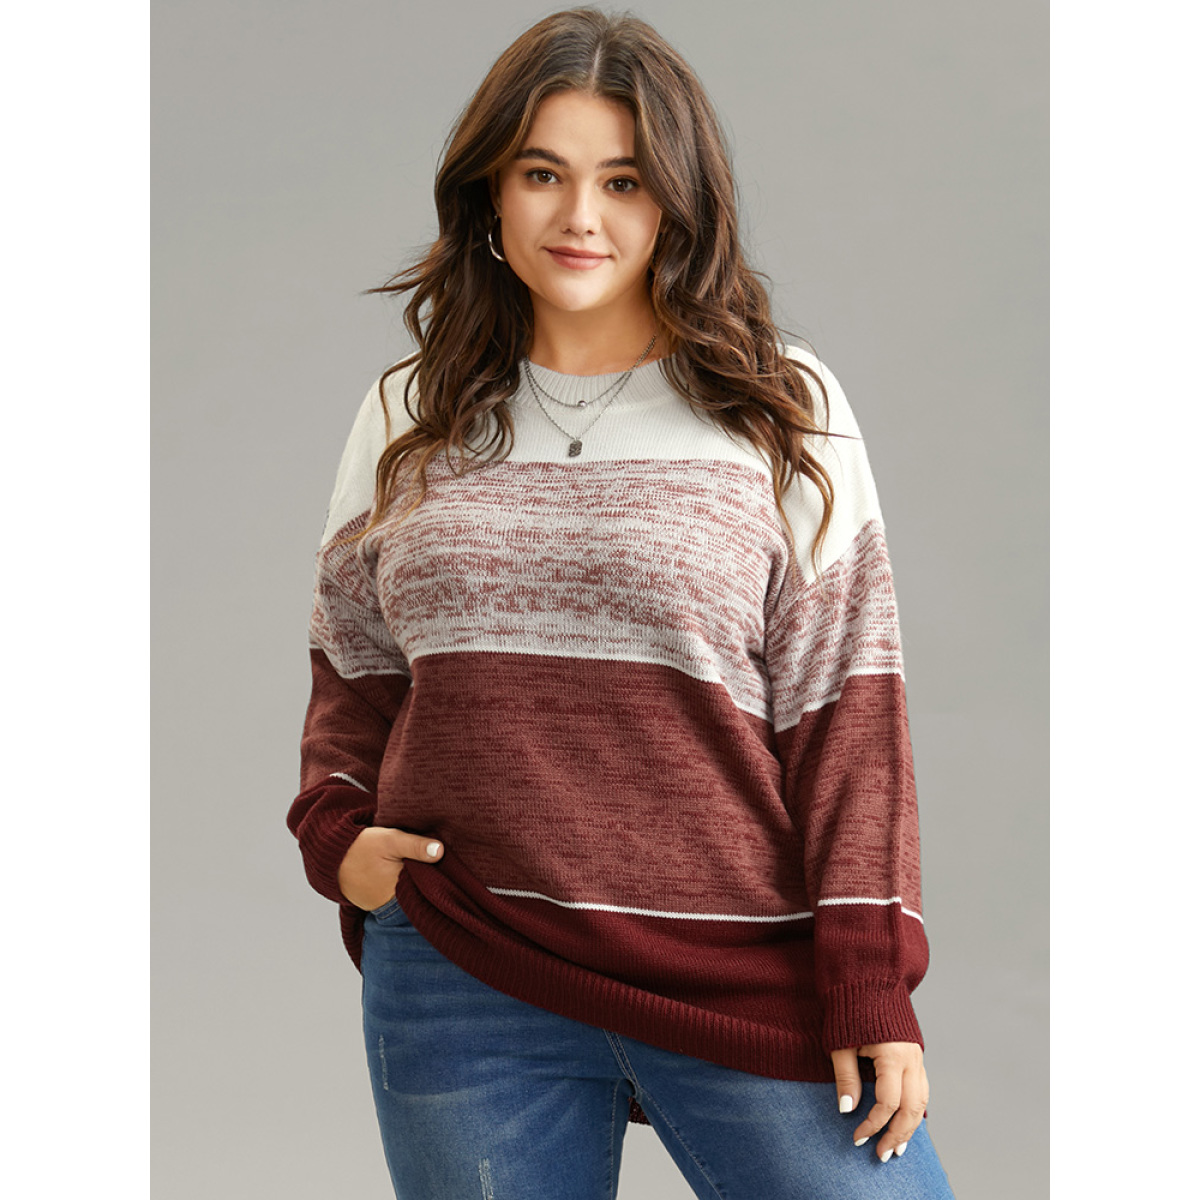 

Plus Size Heather Colorblock Contrast Knit Pullover Russet Women Casual Loose Long Sleeve Round Neck Dailywear Pullovers BloomChic